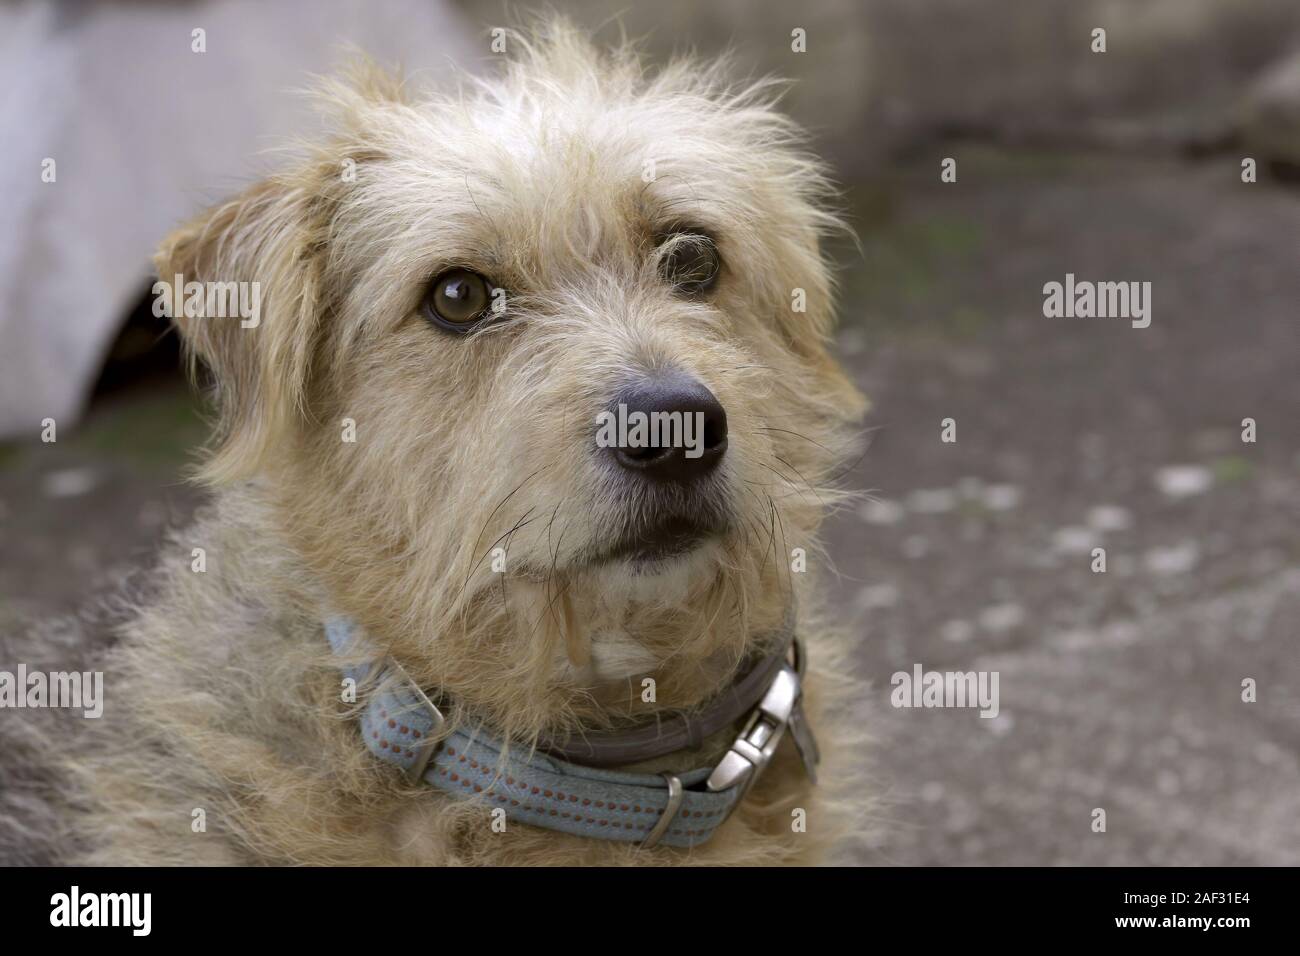 alert face of young terrier dog Stock Photo